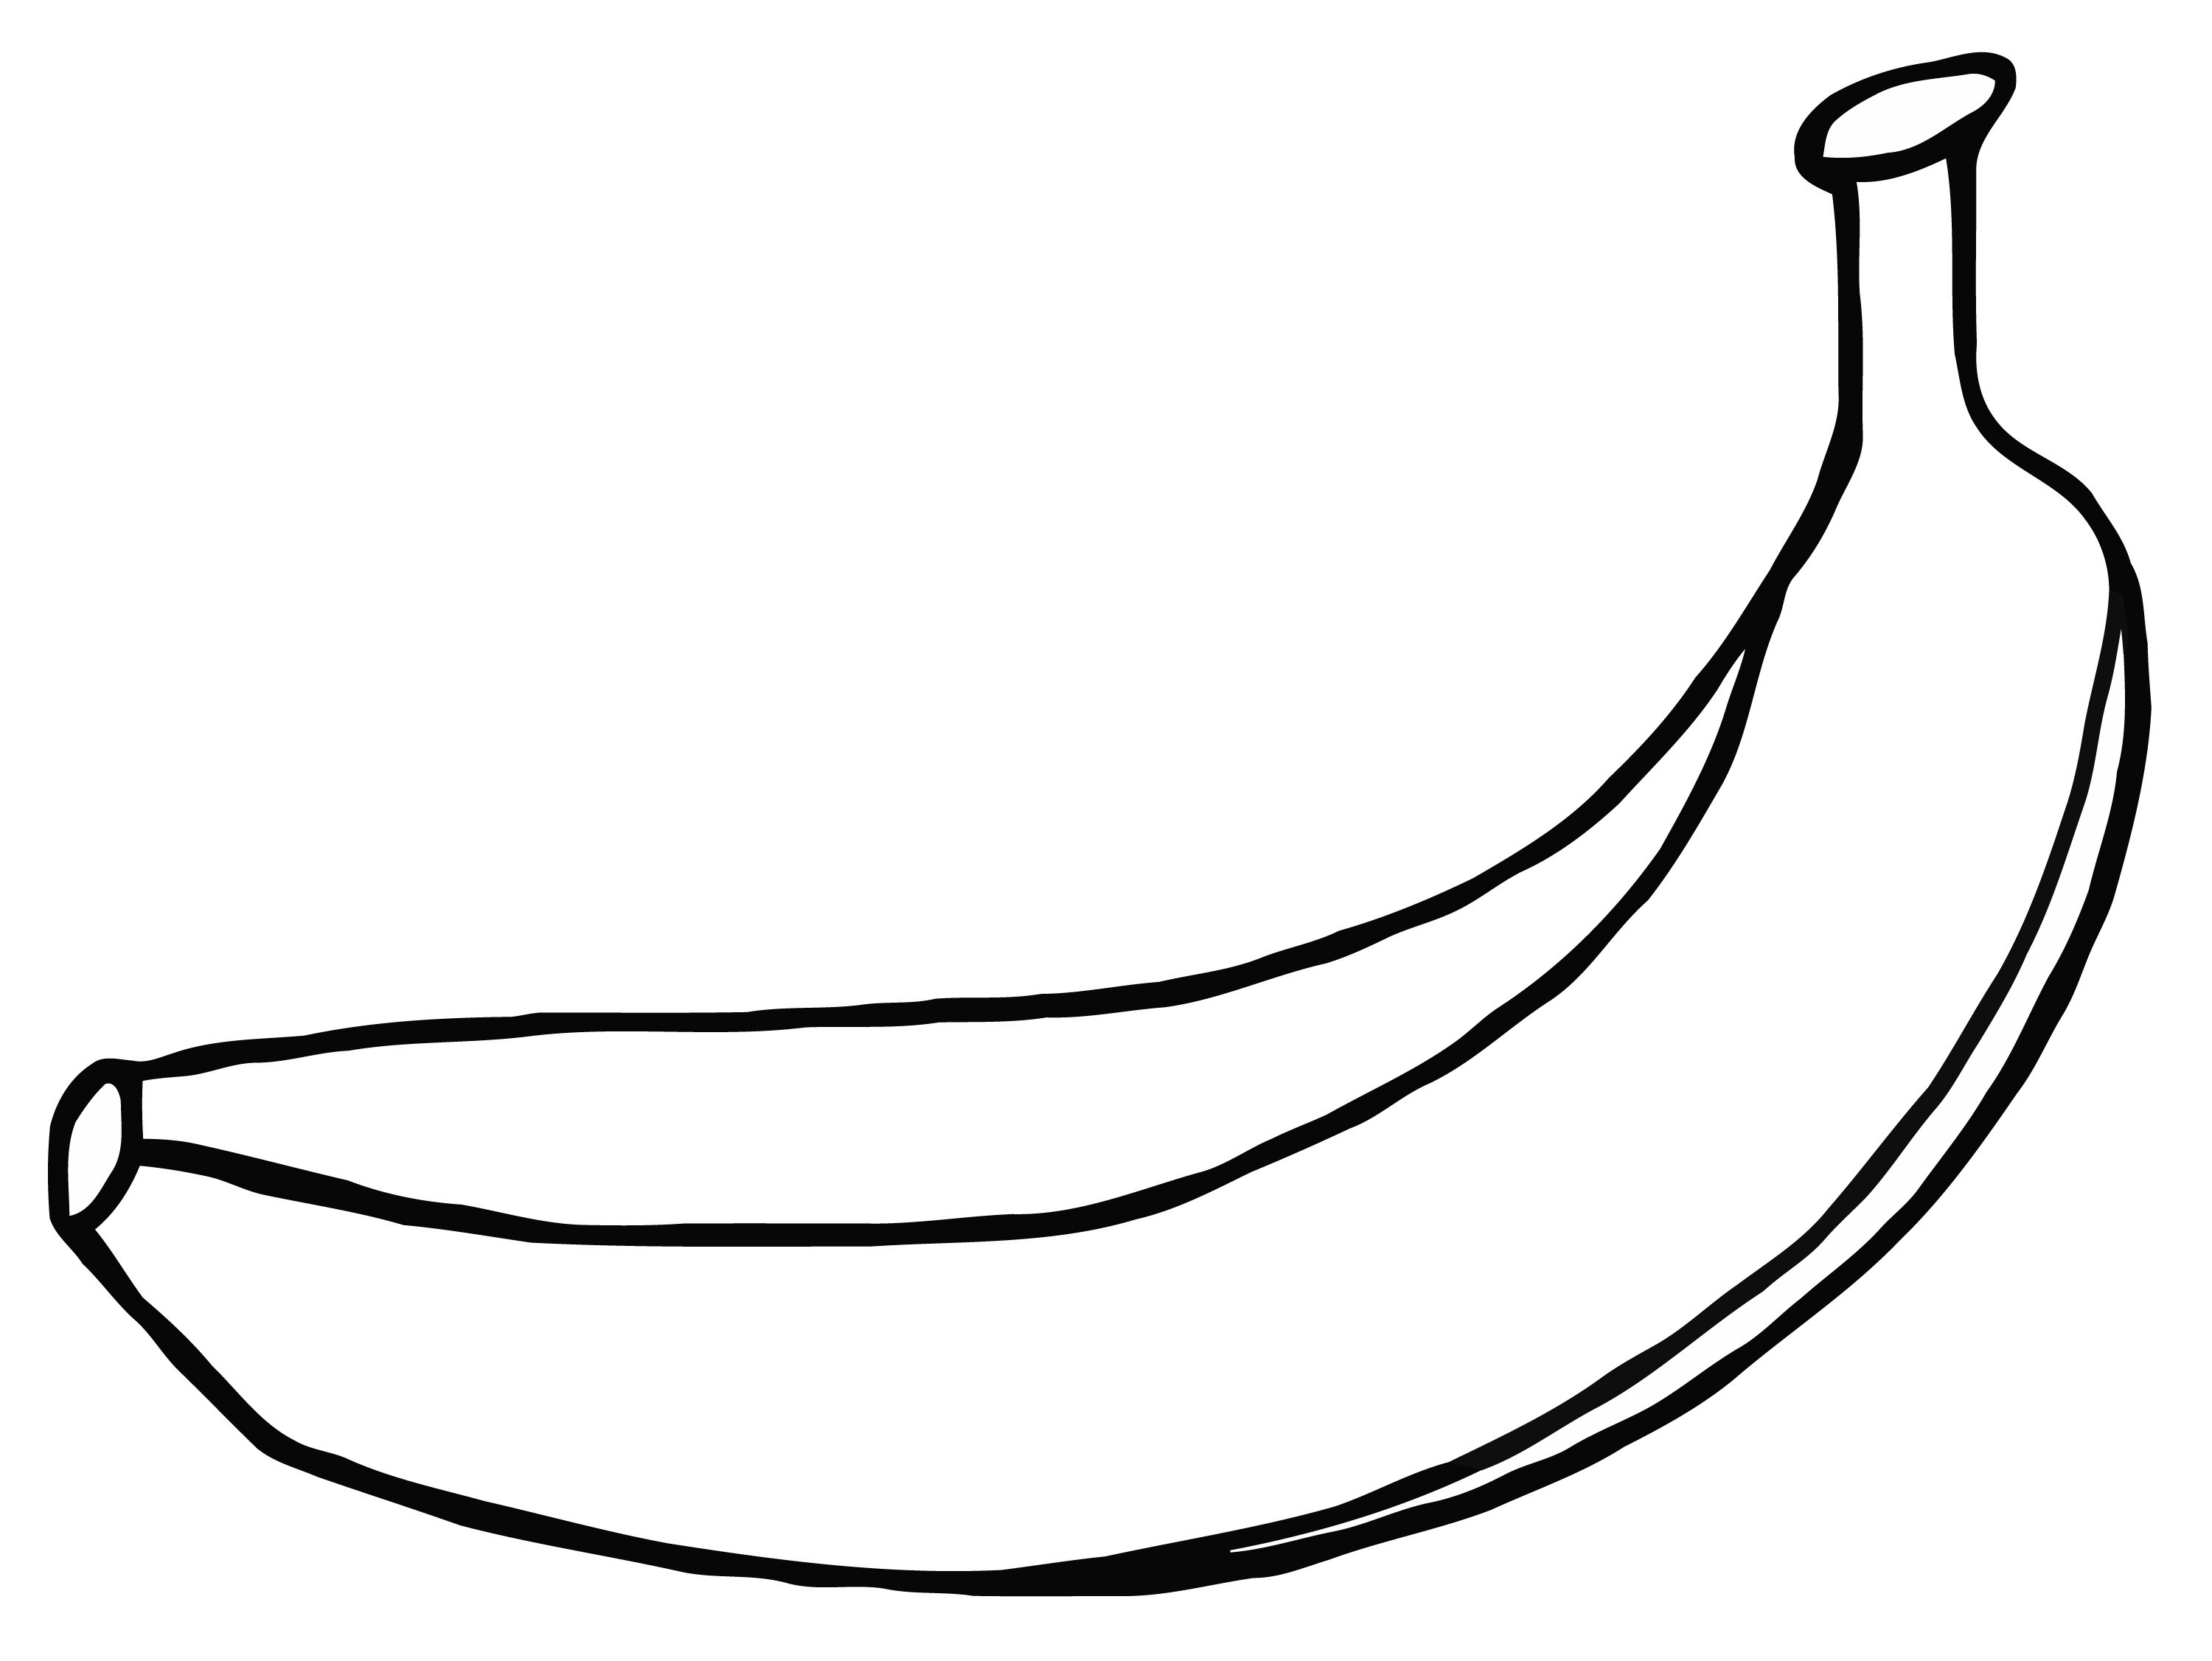 Outline drawing at getdrawings. Clipart banana template